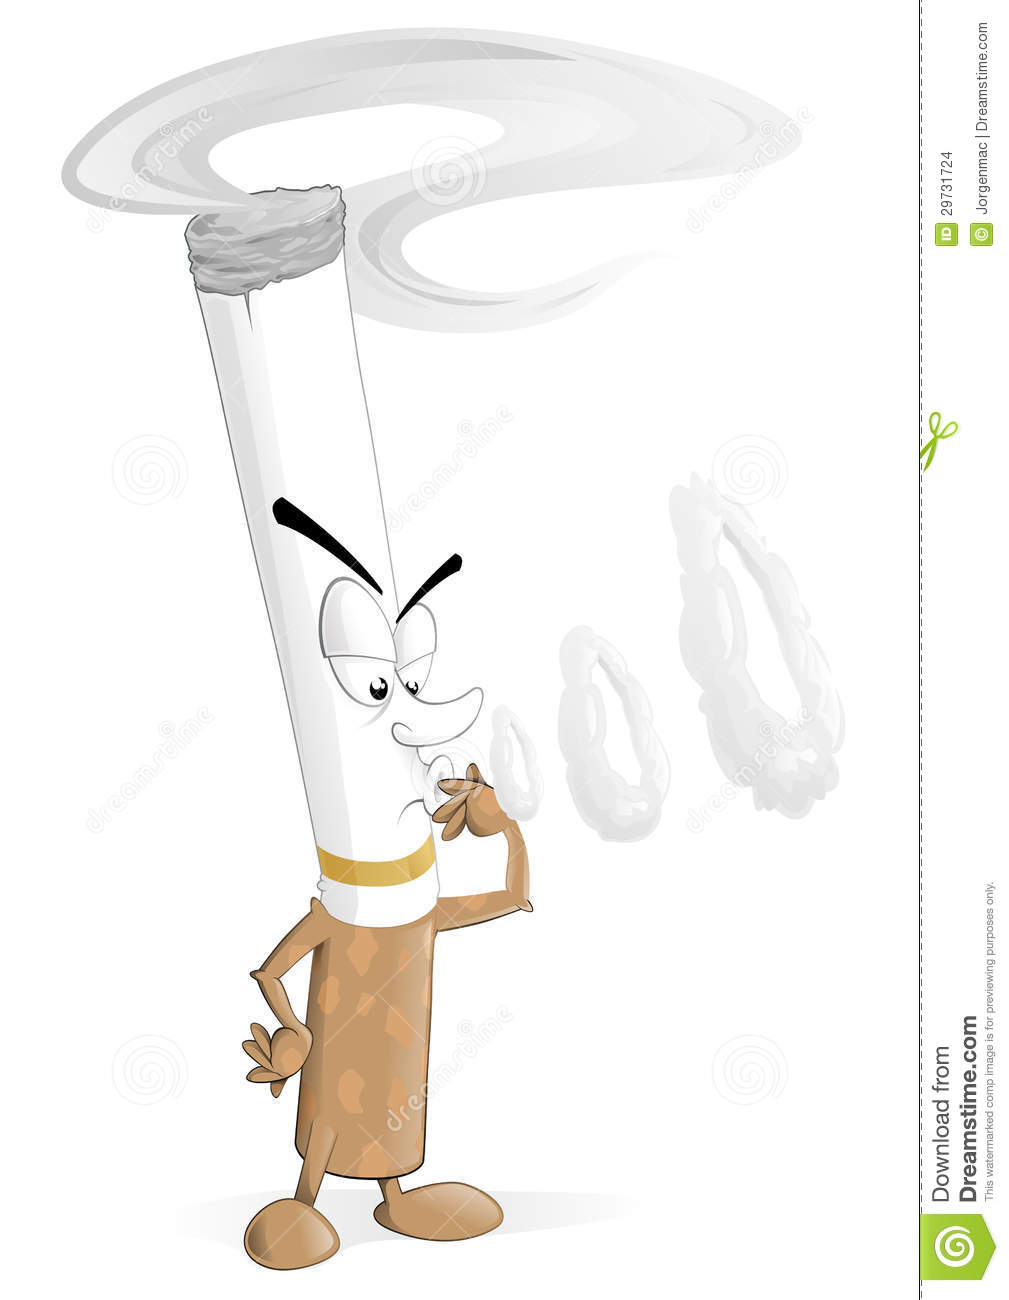 An Evil Cartoon Cigarette Character Coughing Up Smoke Rings